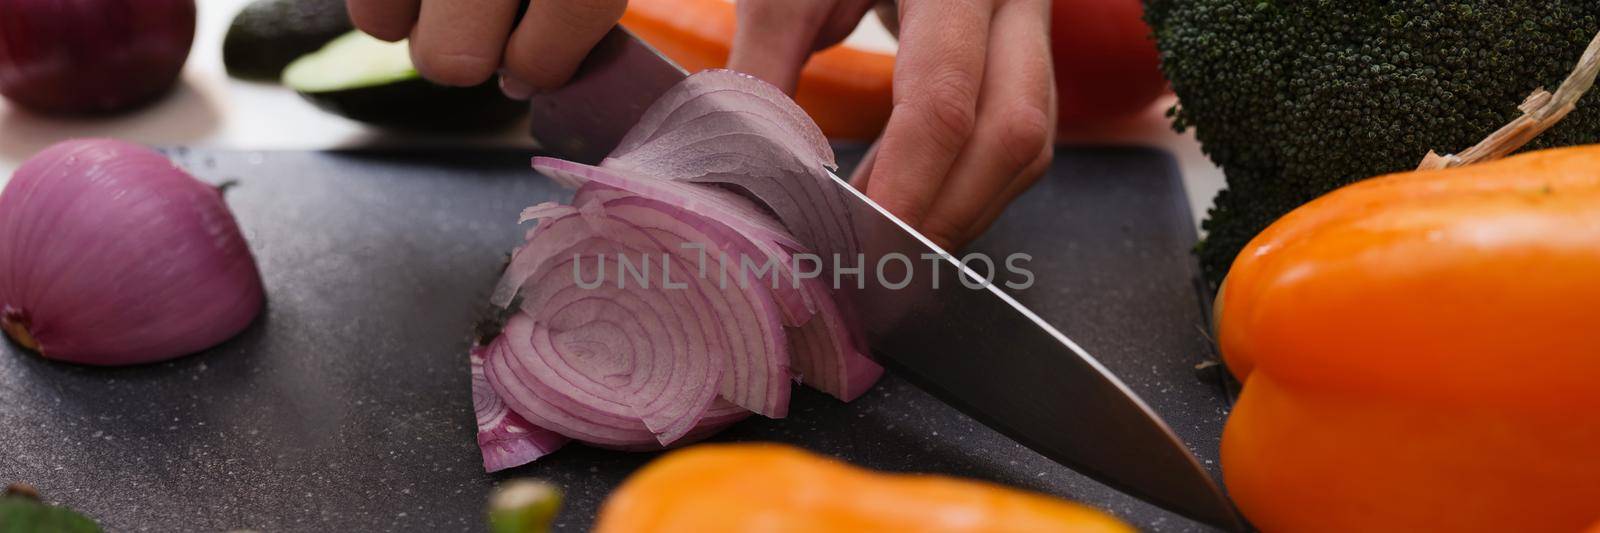 Hands cut onions on a cutting board, vegetables close-up by kuprevich